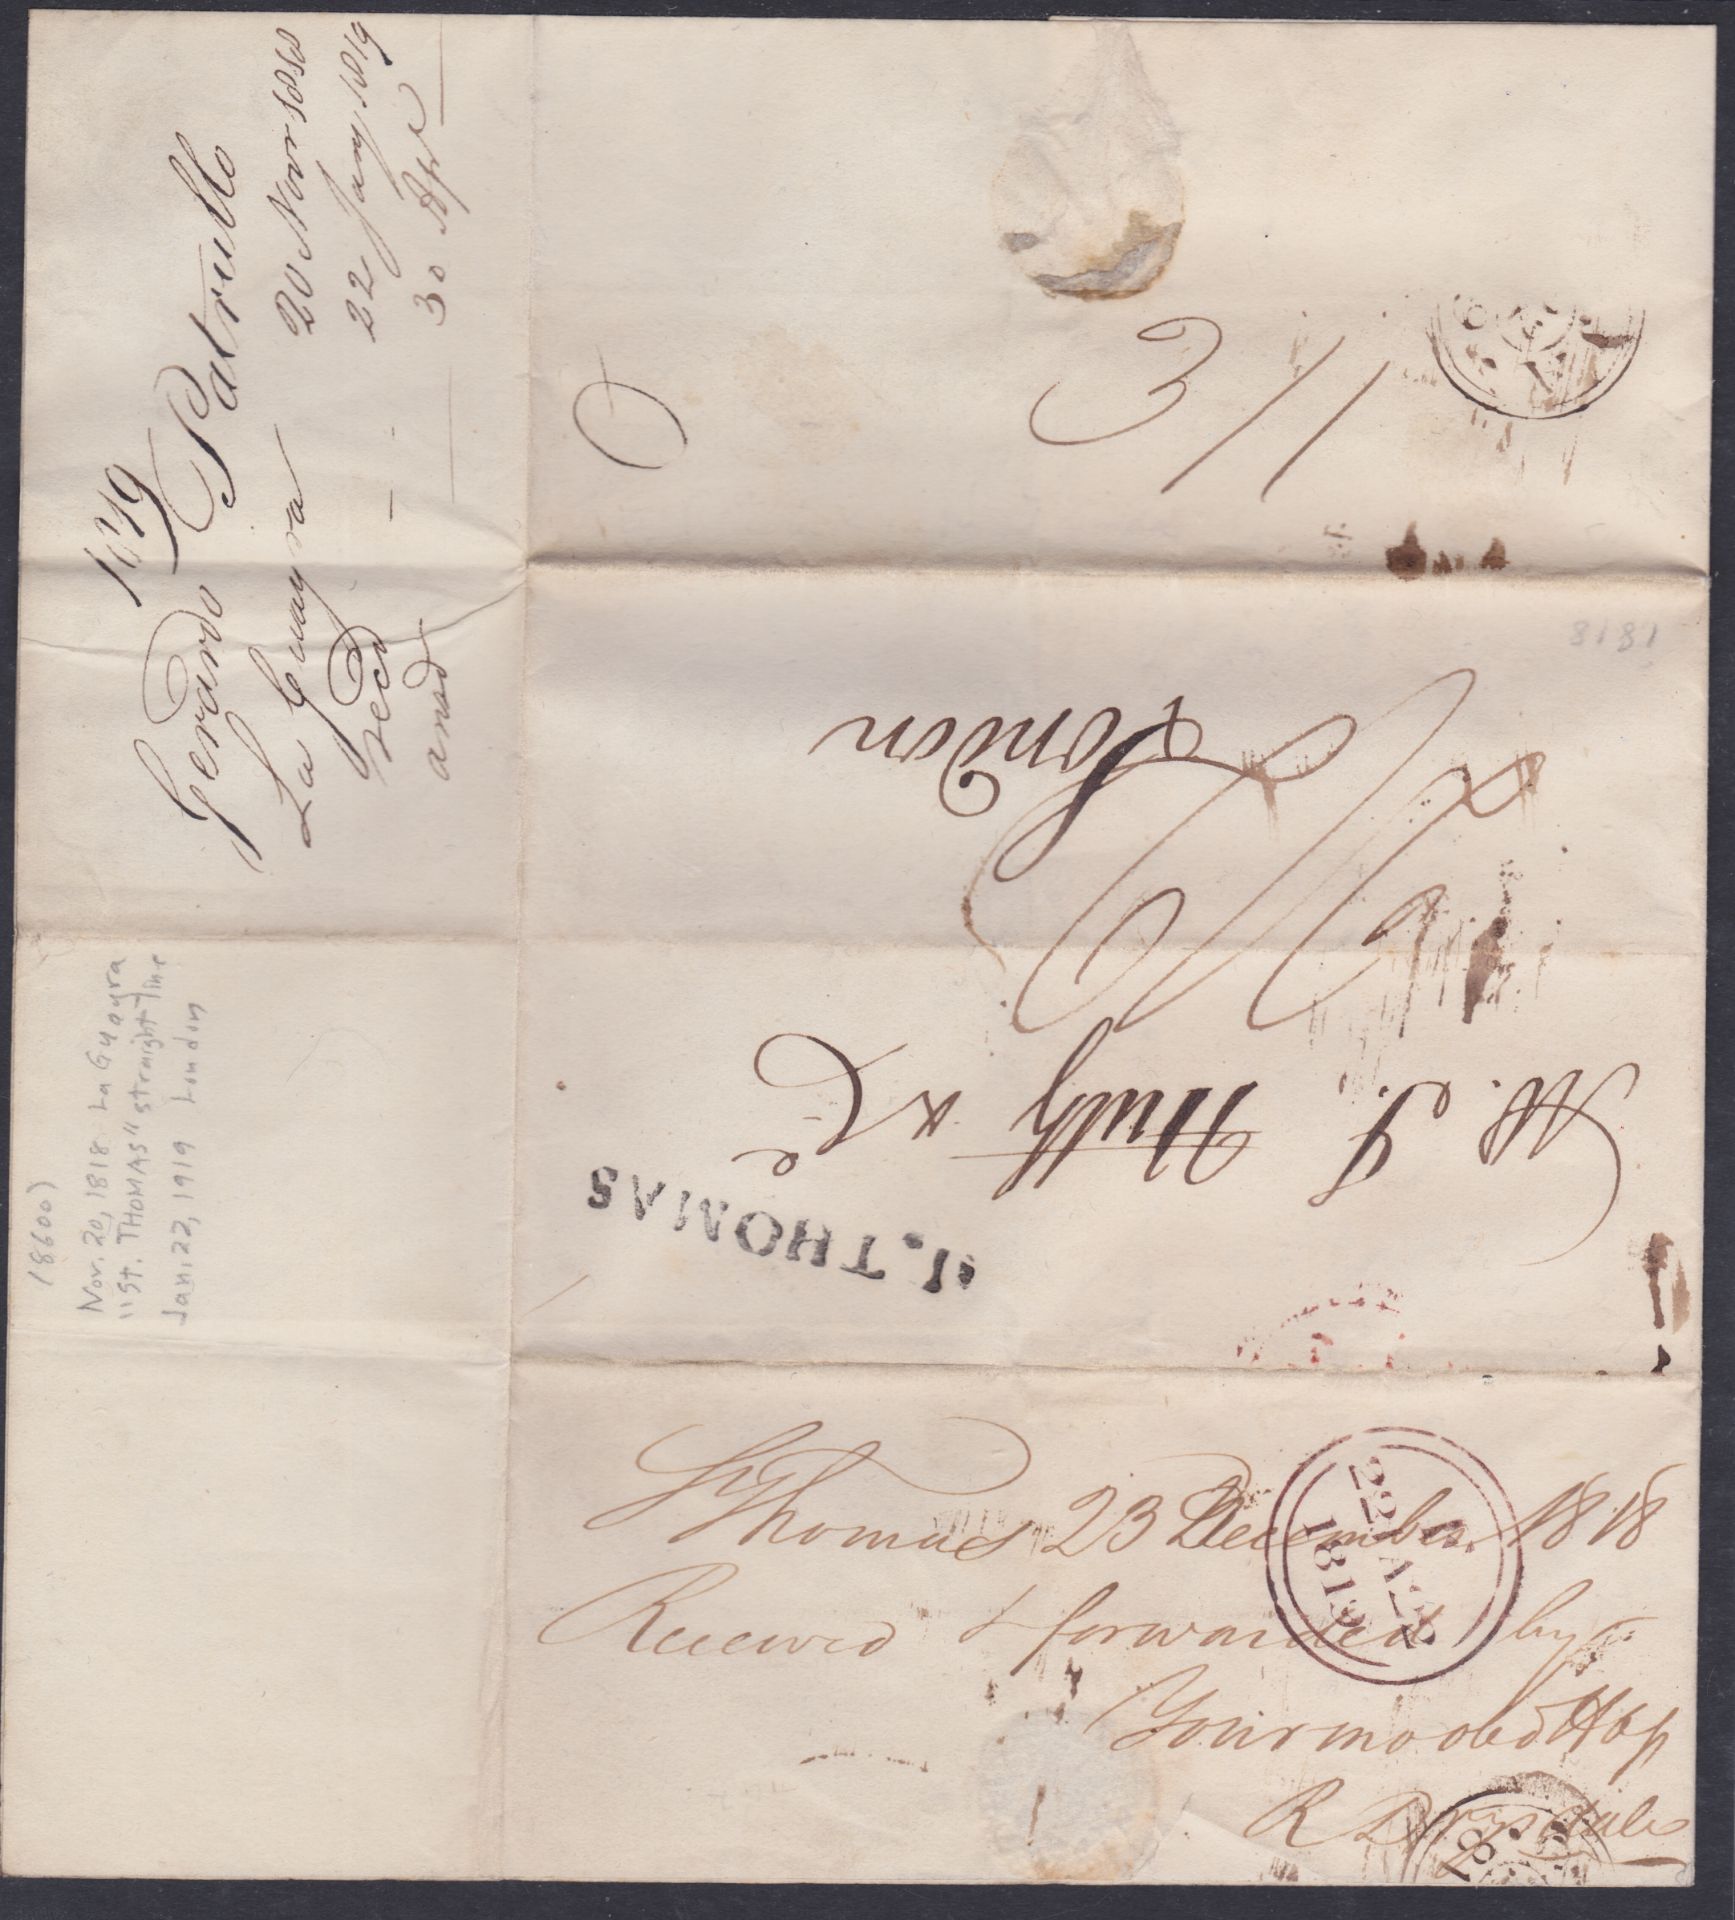 DANISH WEST INDIES 1818 - Entire letter from La Guayra to London sent by forwarding agent to St - Image 2 of 3